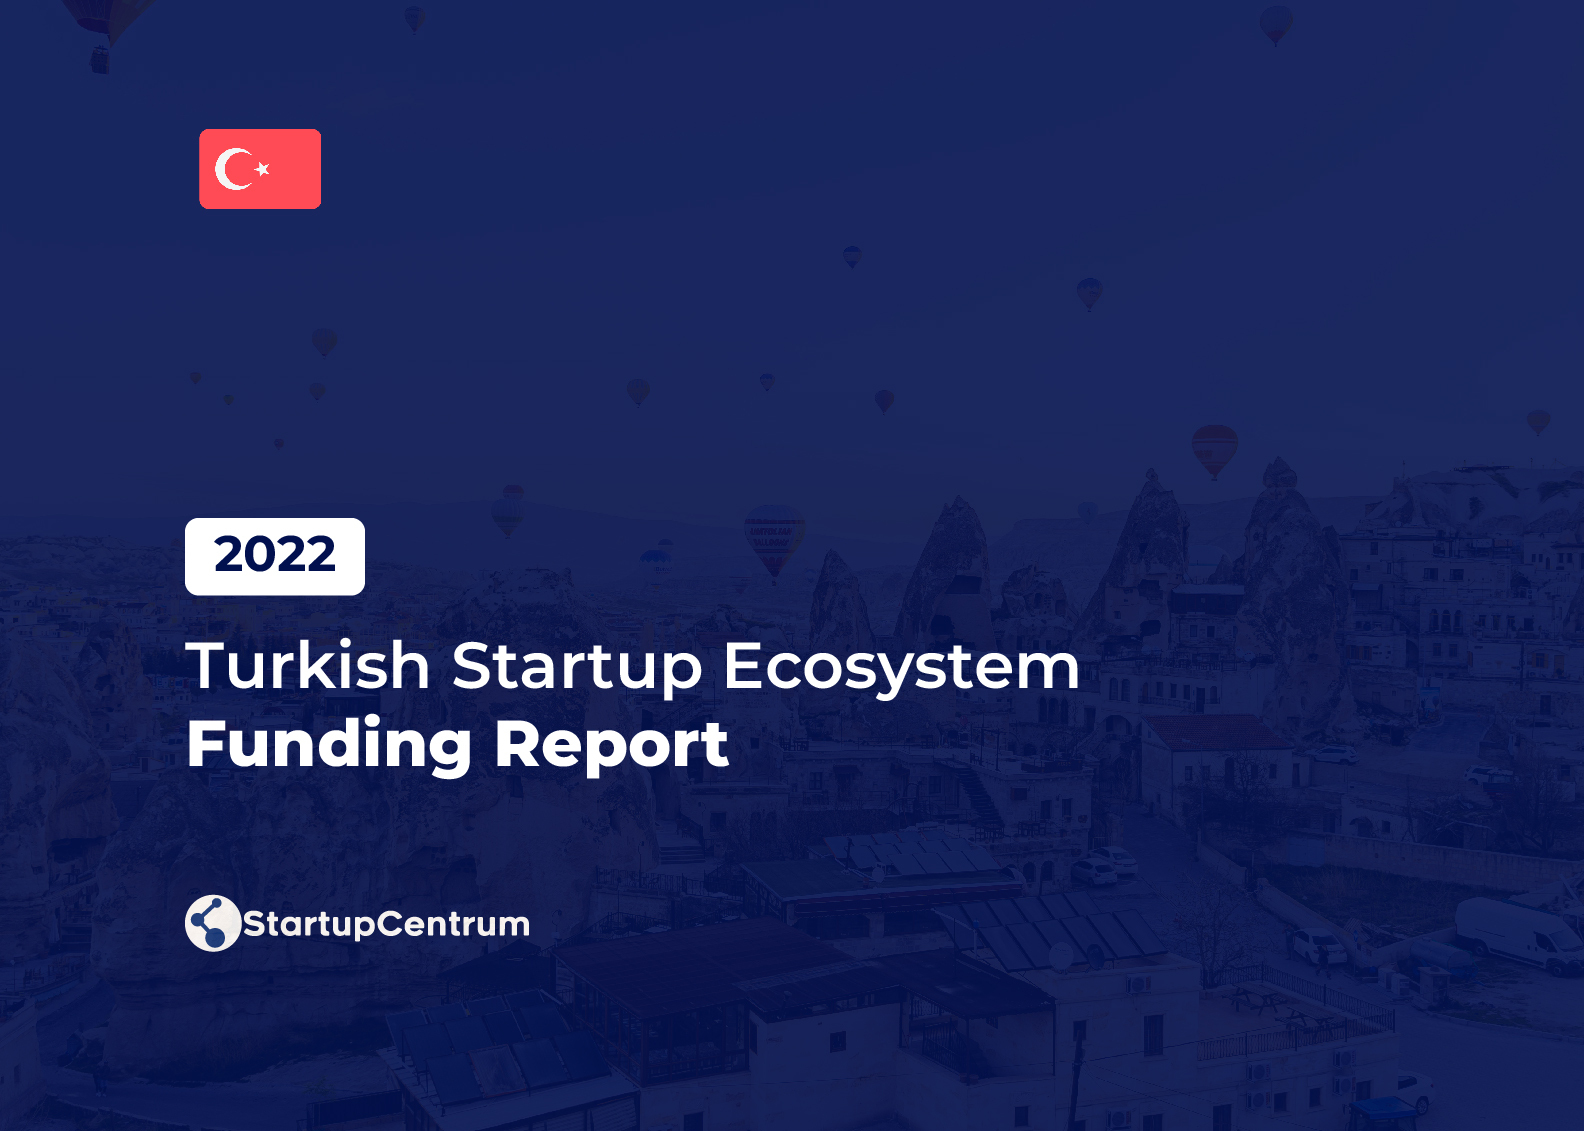 2022 Turkish Startup Ecosystem Investment Report Cover Image